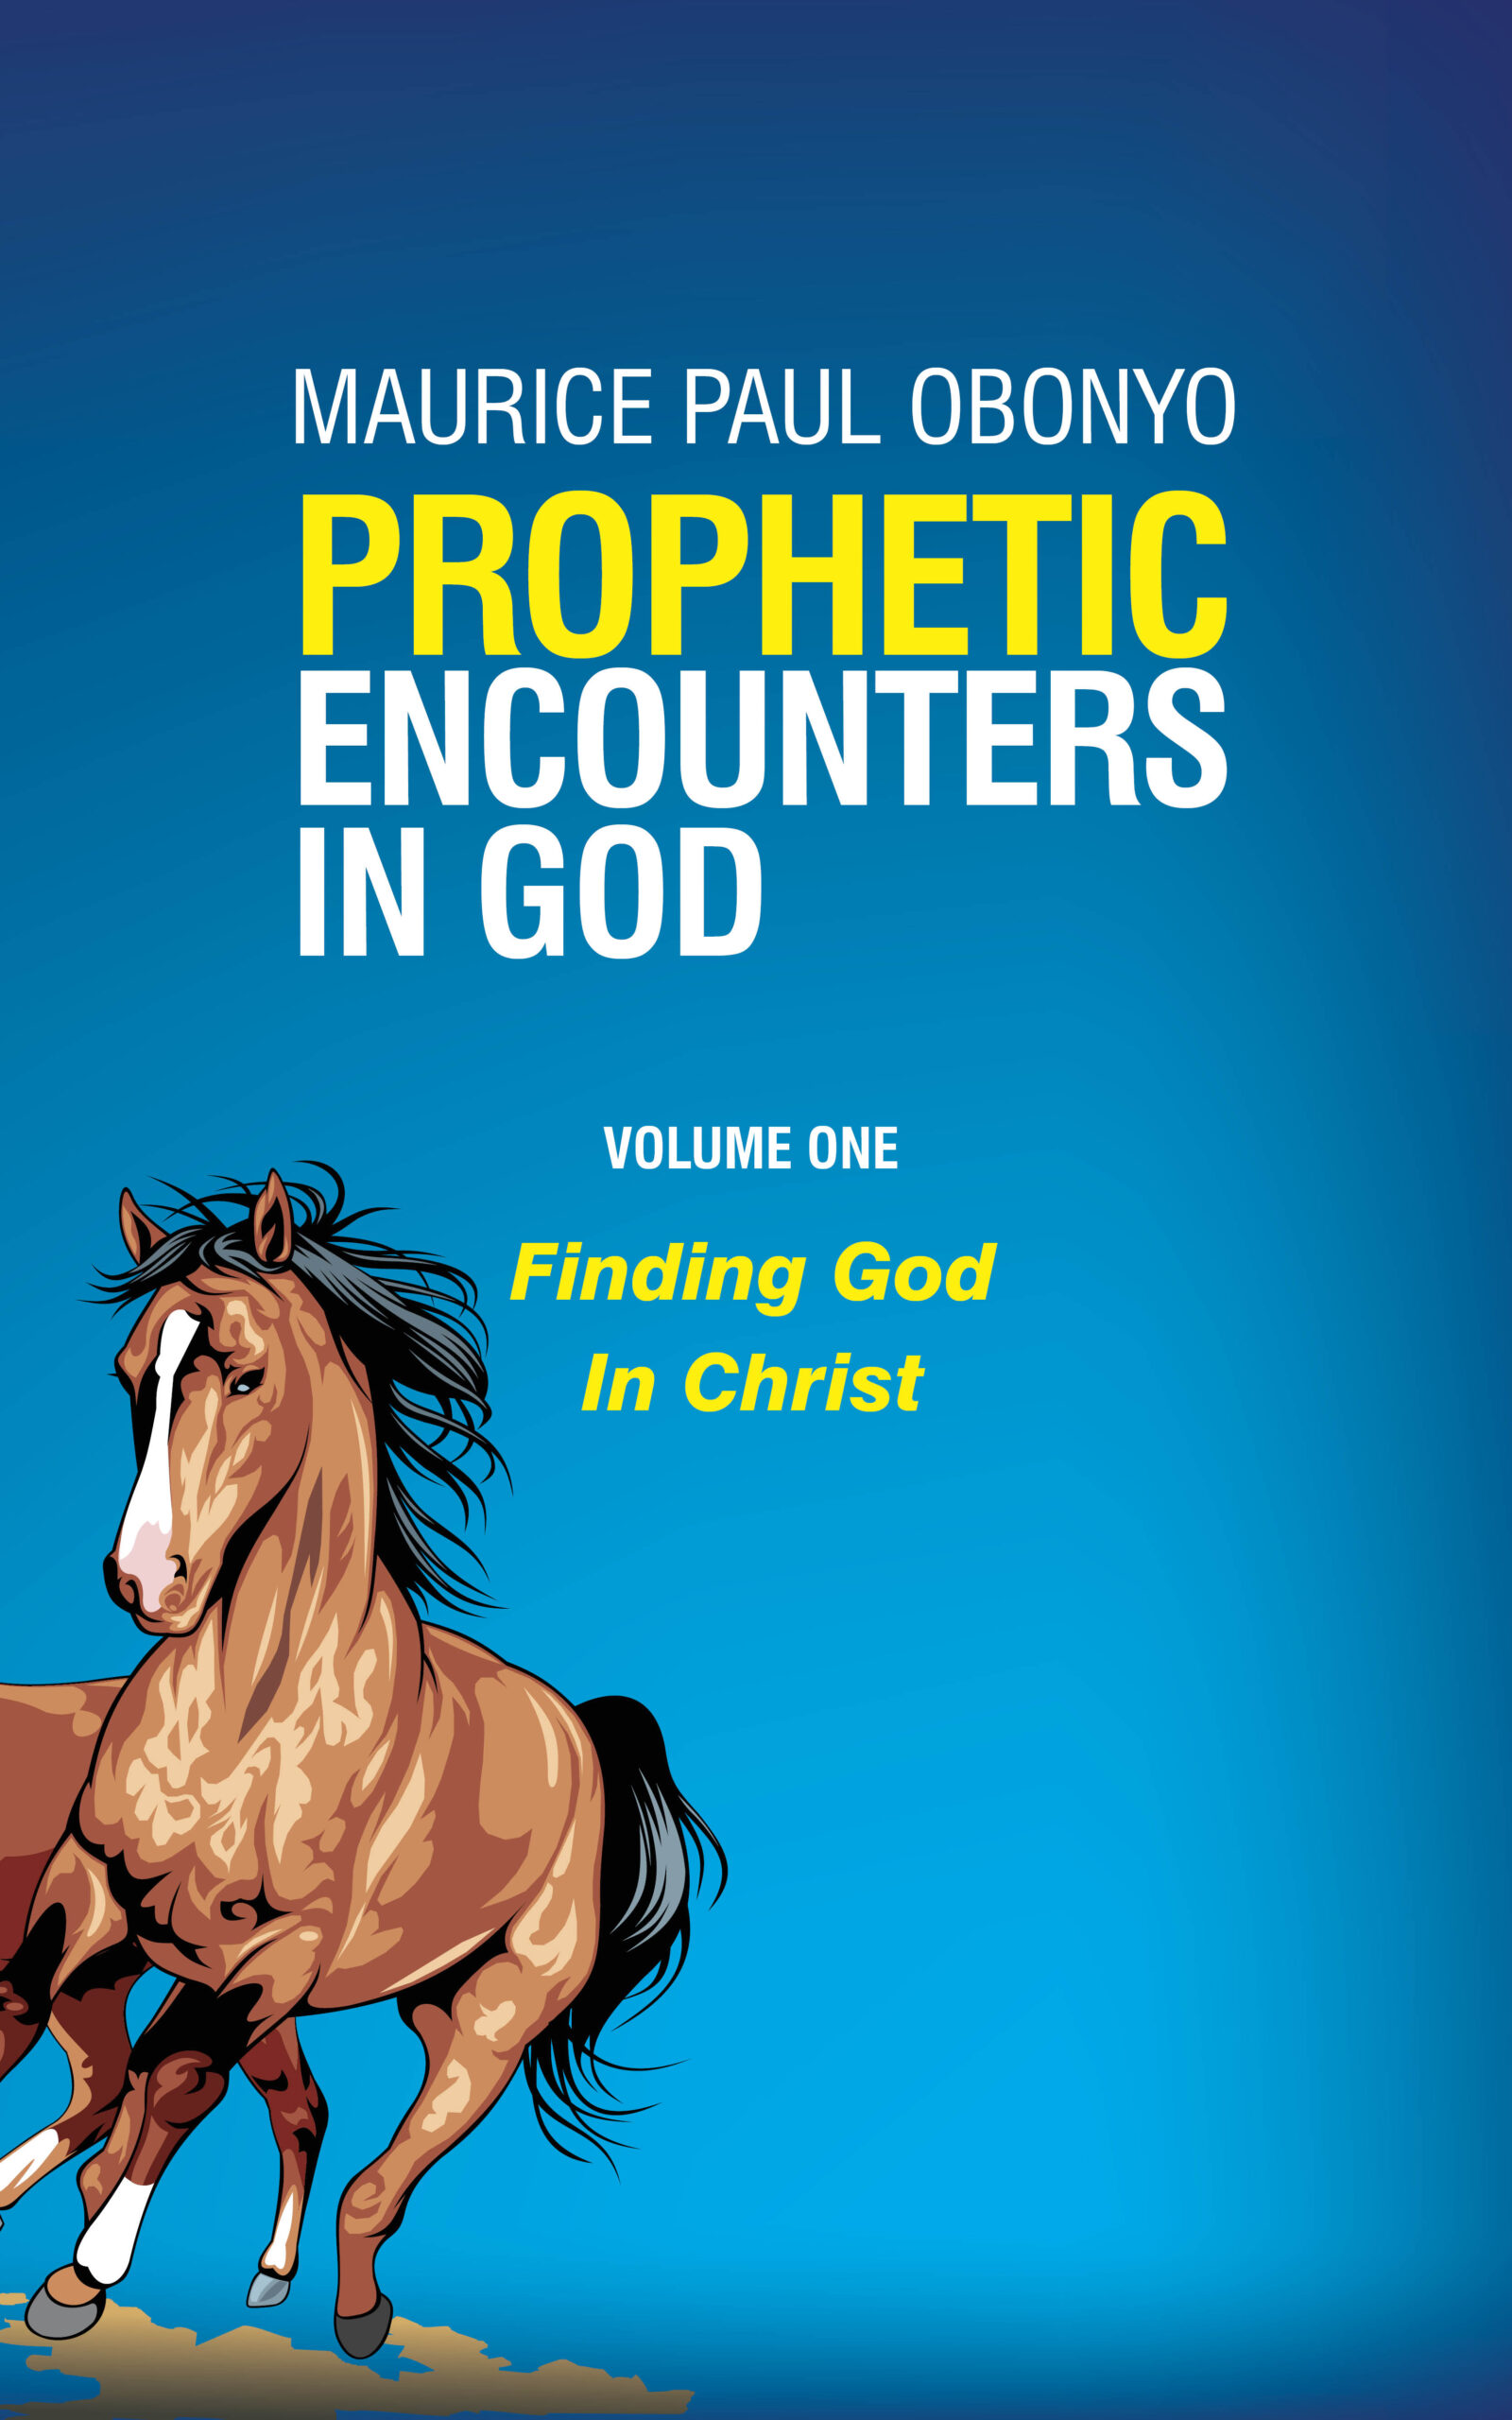 FREE: PROPHETIC ENCOUNTERS IN GOD: Finding God In Christ by MAURICE PAUL OBONYO